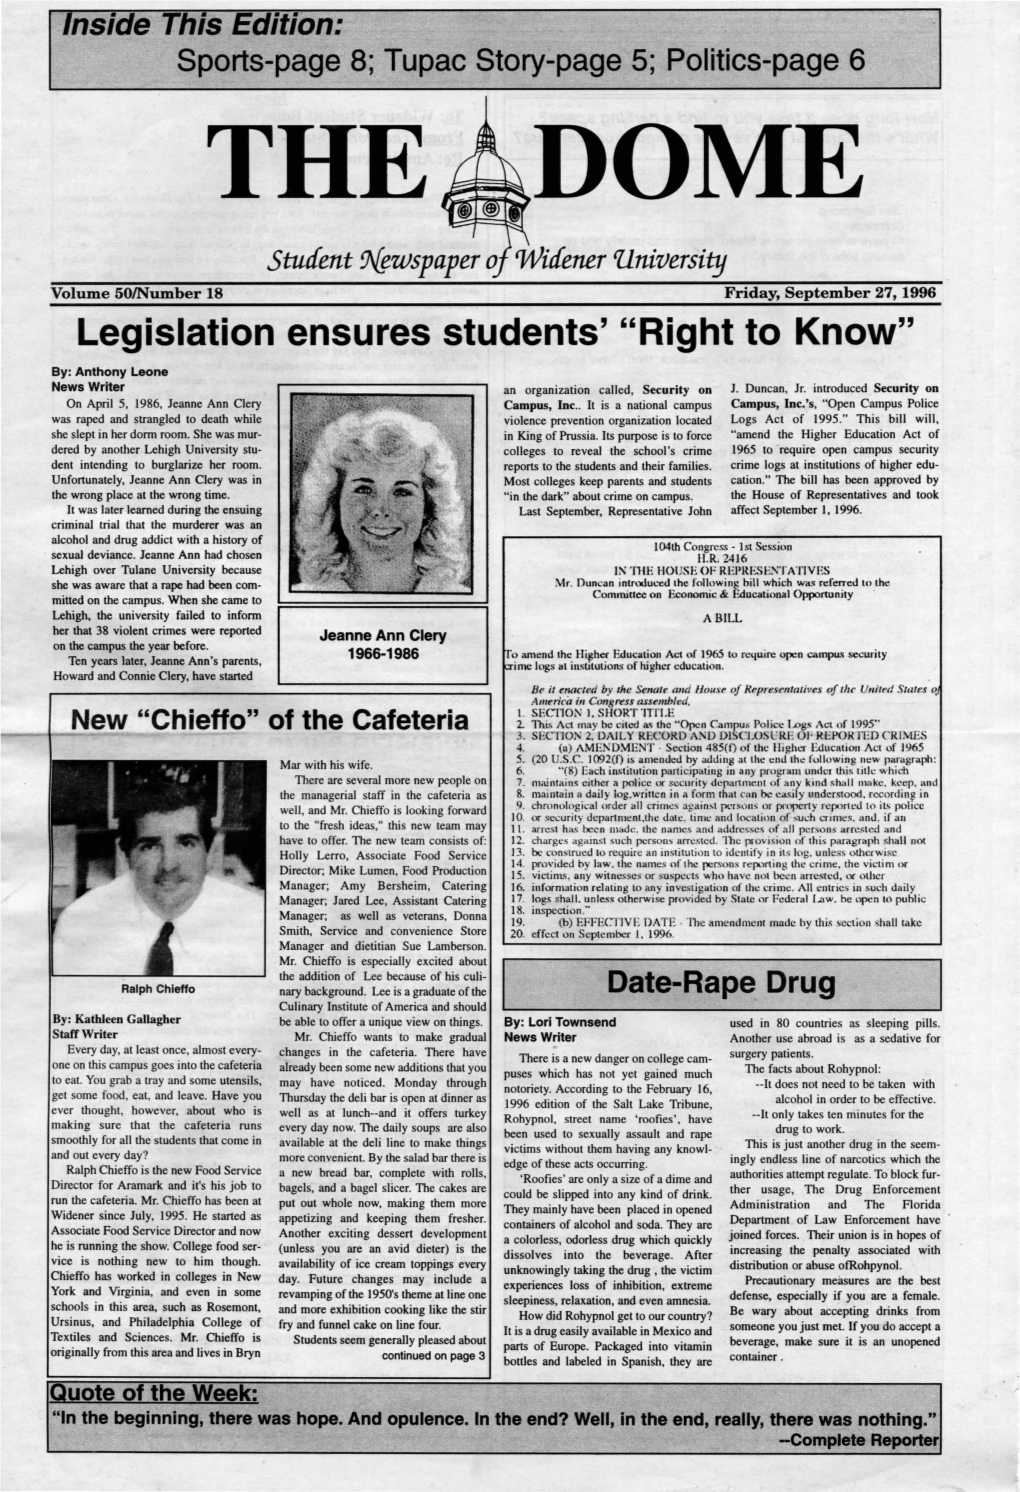 Legislation Ensures Students' "Right to Know"